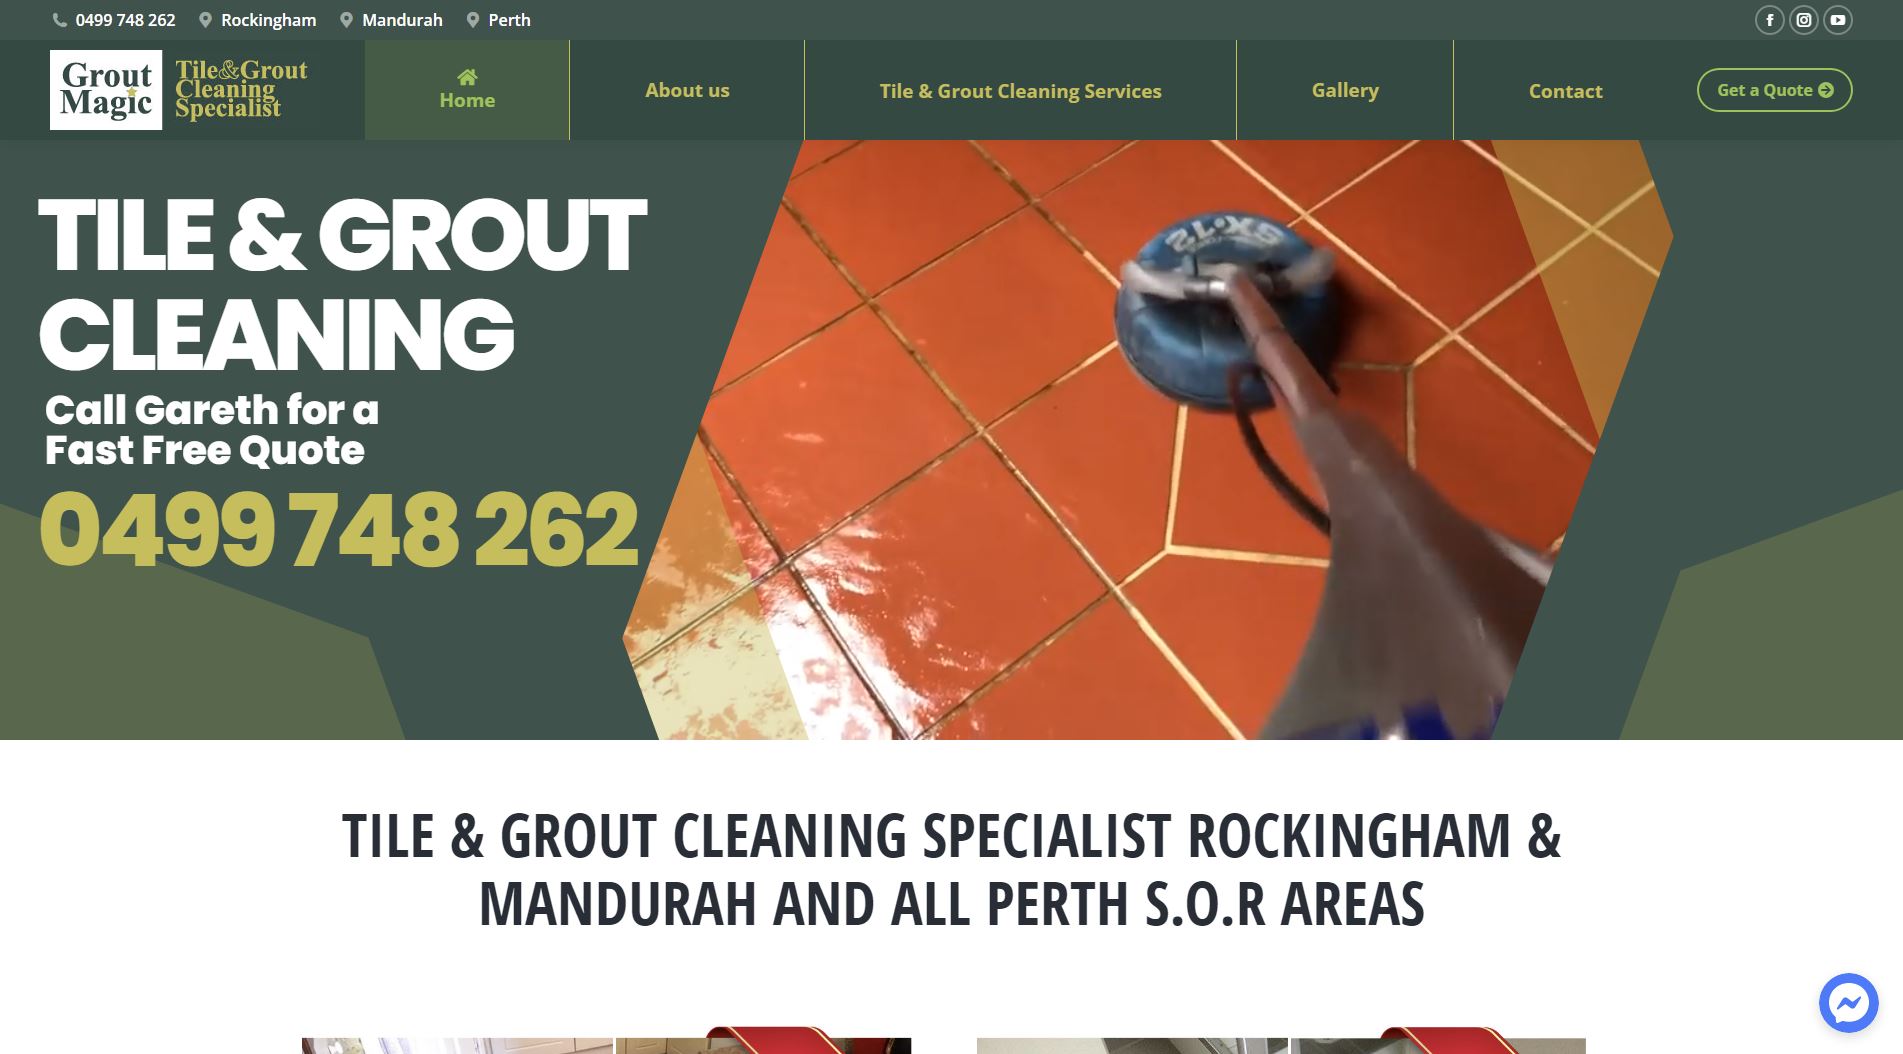 Tile & Grout Cleaning - Grout Magic